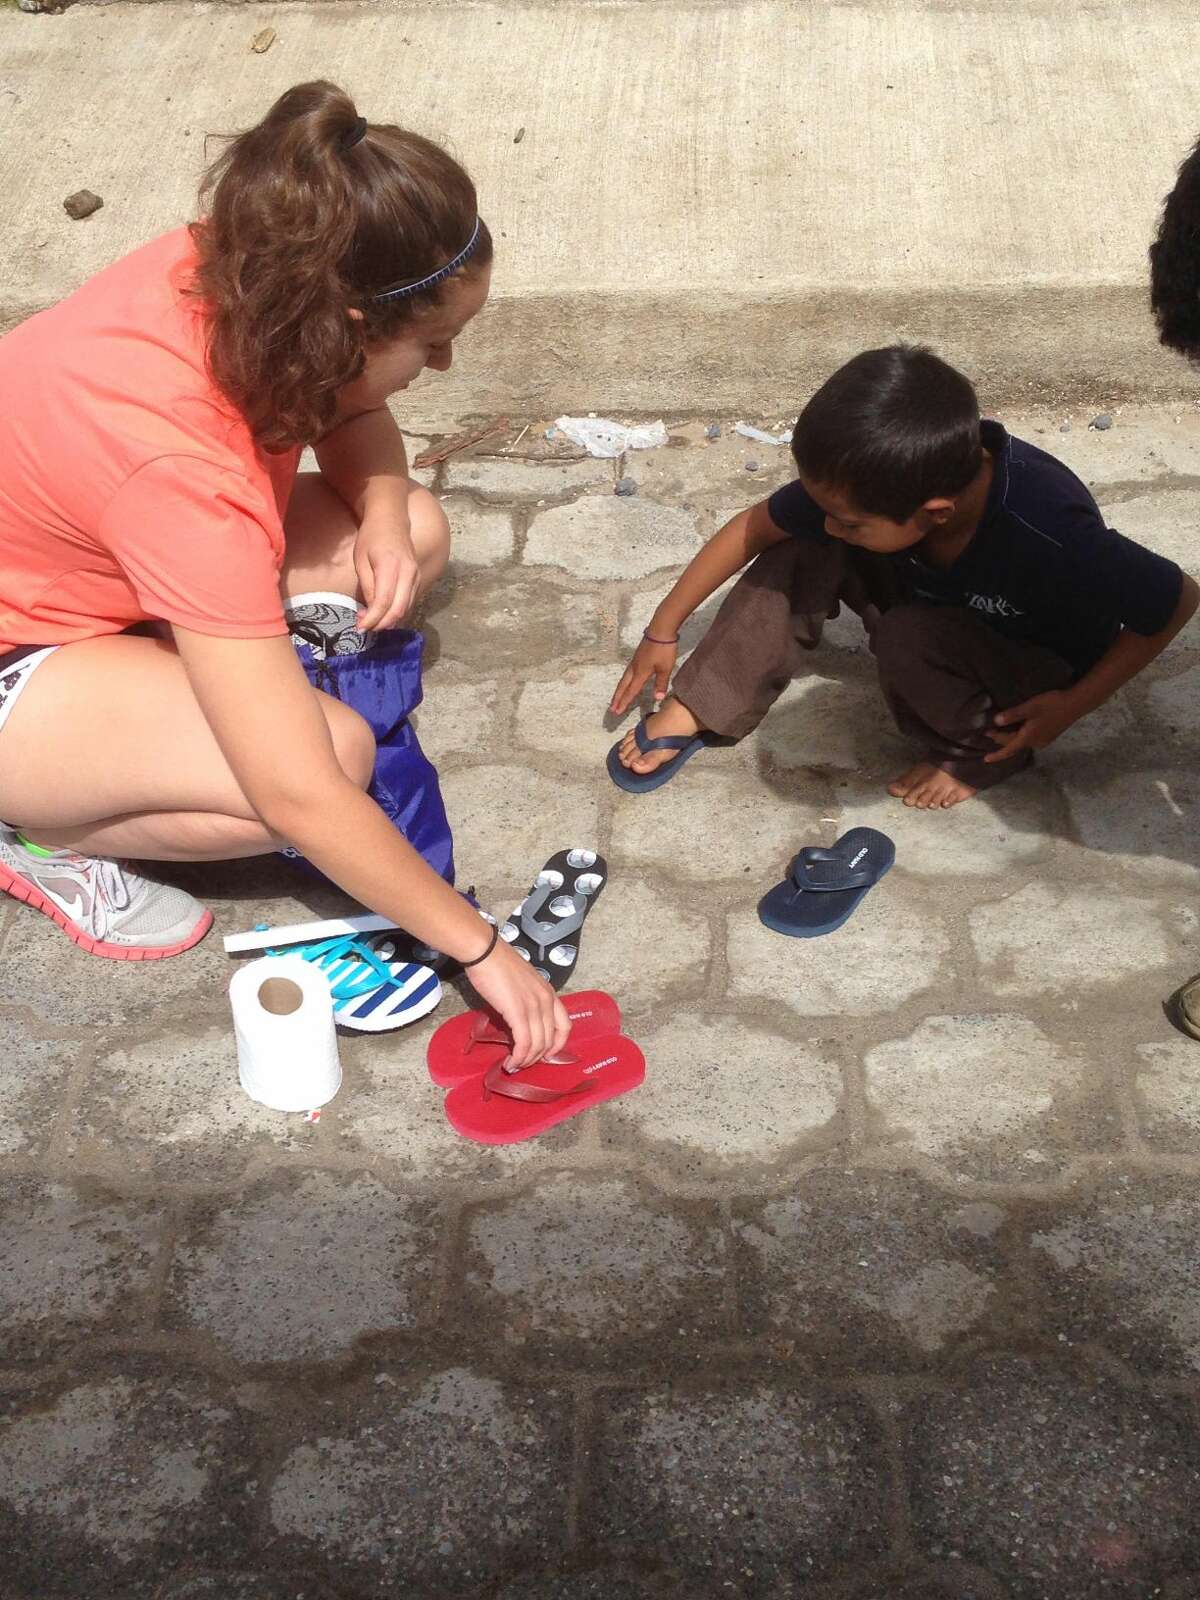 Contributed photo Rev. Artie Kassimis's Nicolette daughter gives shoes to a Guatemalan boy.